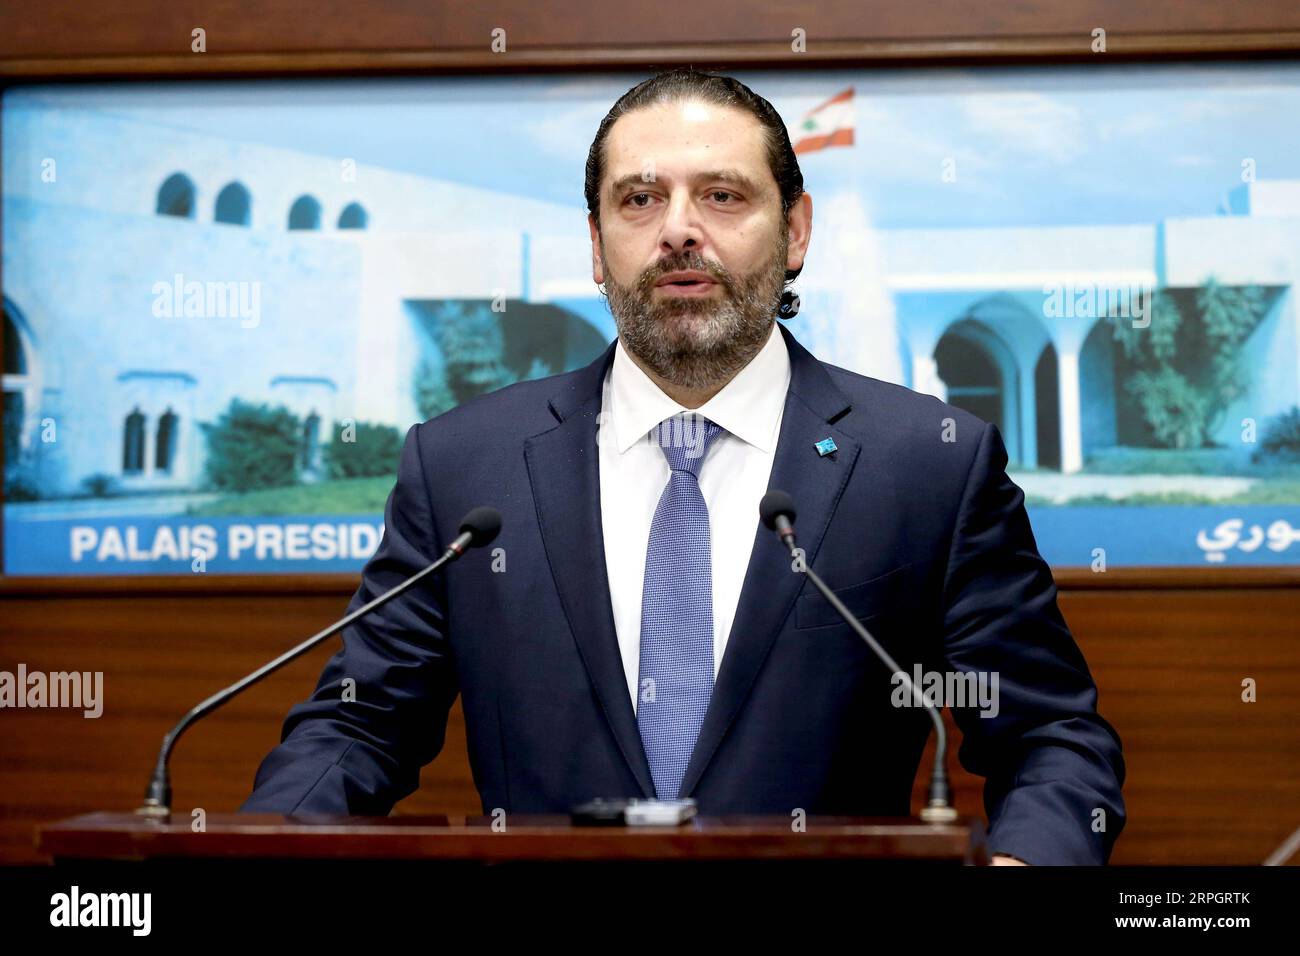 News Bilder des Tages 191021 -- BEIRUT, Oct. 21, 2019 Xinhua -- Lebanese Prime Minister Saad Hariri speaks at a press conference in Beirut, Lebanon, on Oct. 21, 2019. Saad Hariri announced on Monday his long-awaited economic plan following five days of nationwide demonstrations against the government s policies, Al Manar local TV Channel reported. Dalati & Nohra/Handout via Xinhua LEBANON-BEIRUT-PM-ECONOMIC PLAN-NATIONWIDE PROTEST PUBLICATIONxNOTxINxCHN Stock Photo